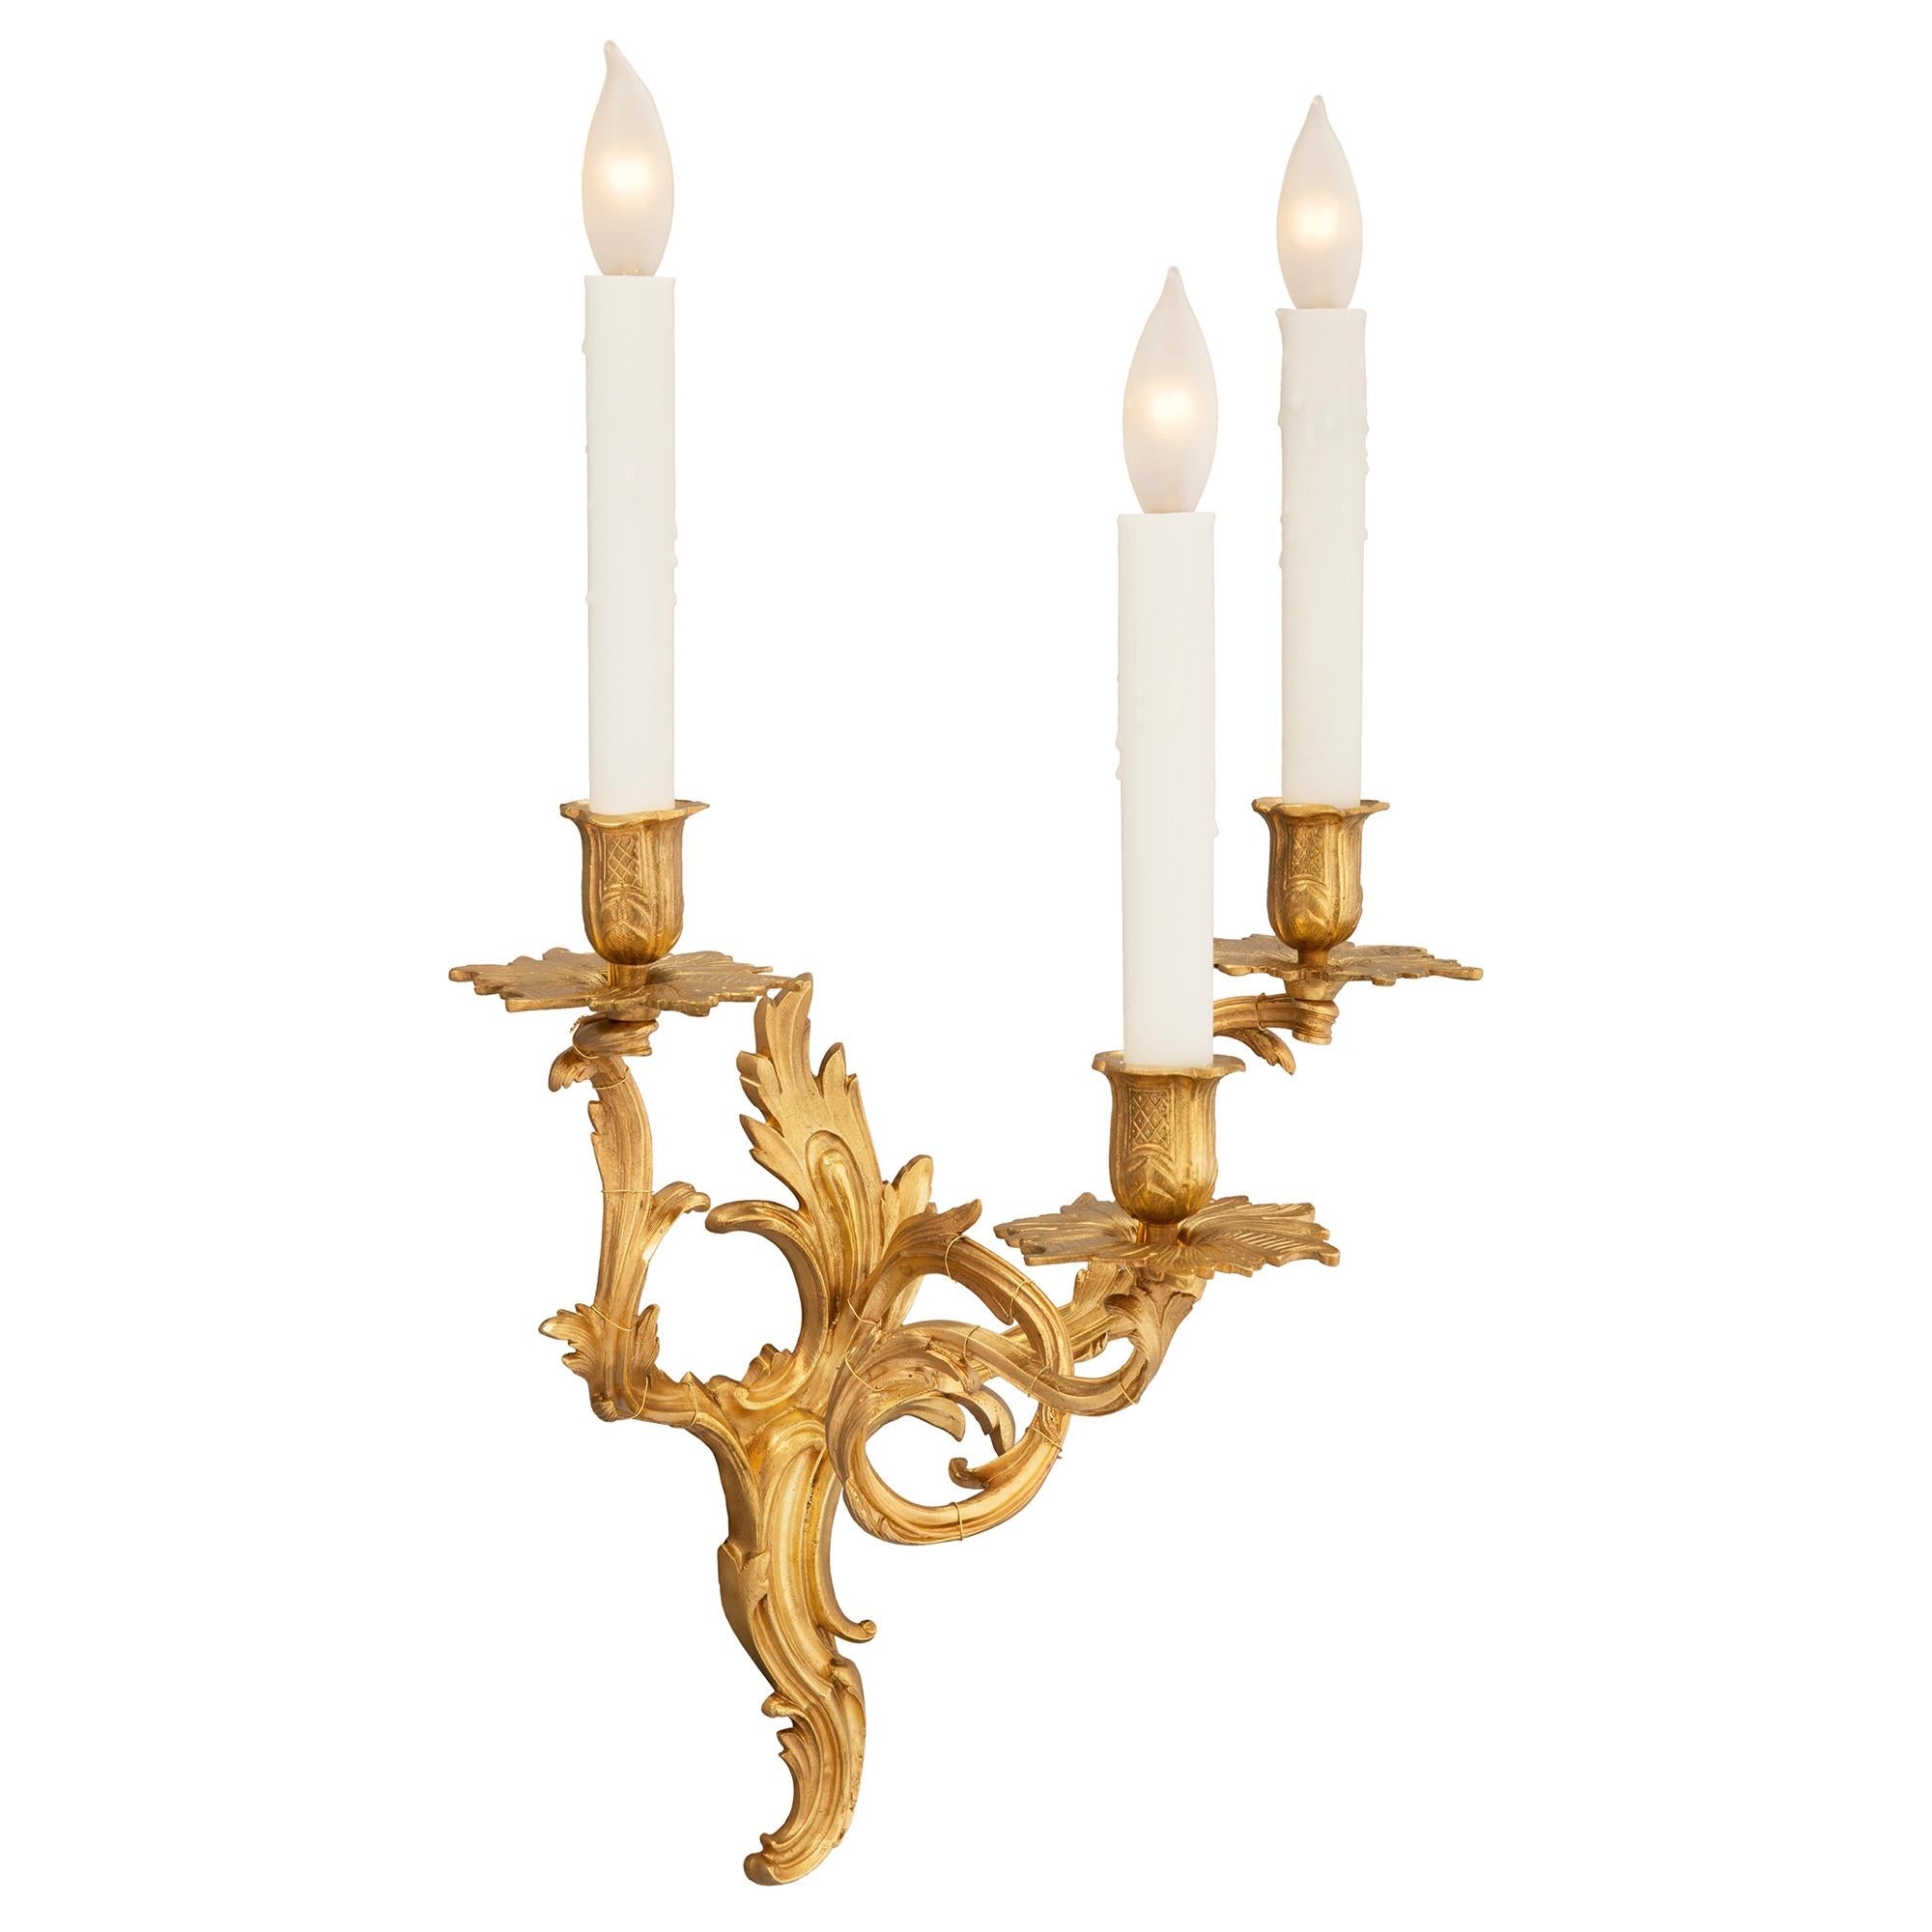 A charming true pair of French 19th century Louis XV st. ormolu three arm sconces. Each sconce is centered by a lovely scrolled foliate design in a striking satin and burnished finish which extends up the back plate. Branching out are the elegant